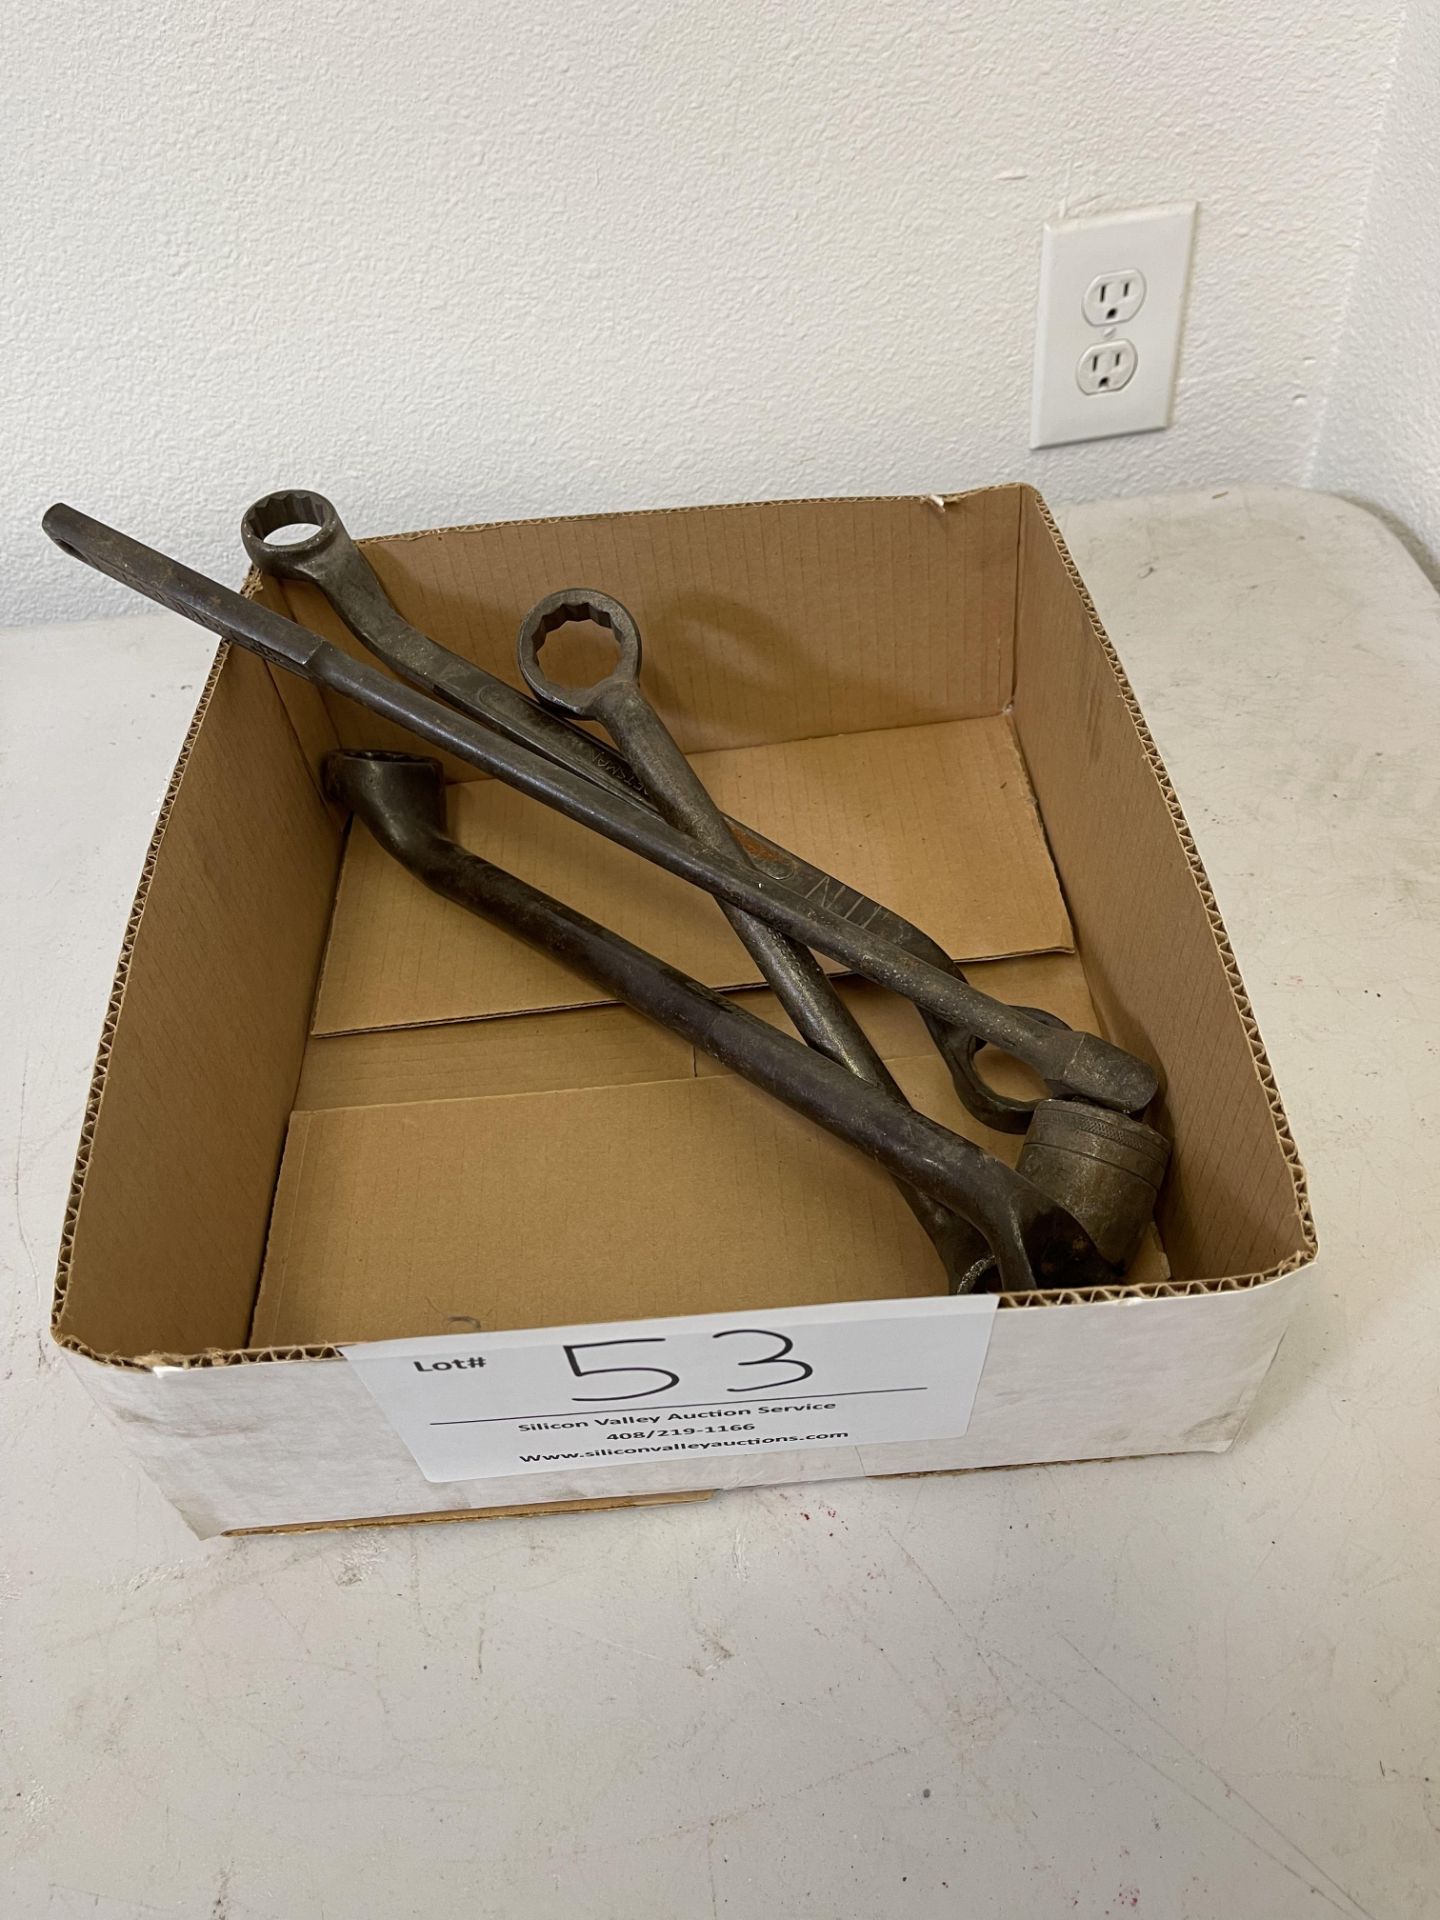 Miscellaneous box wrenches